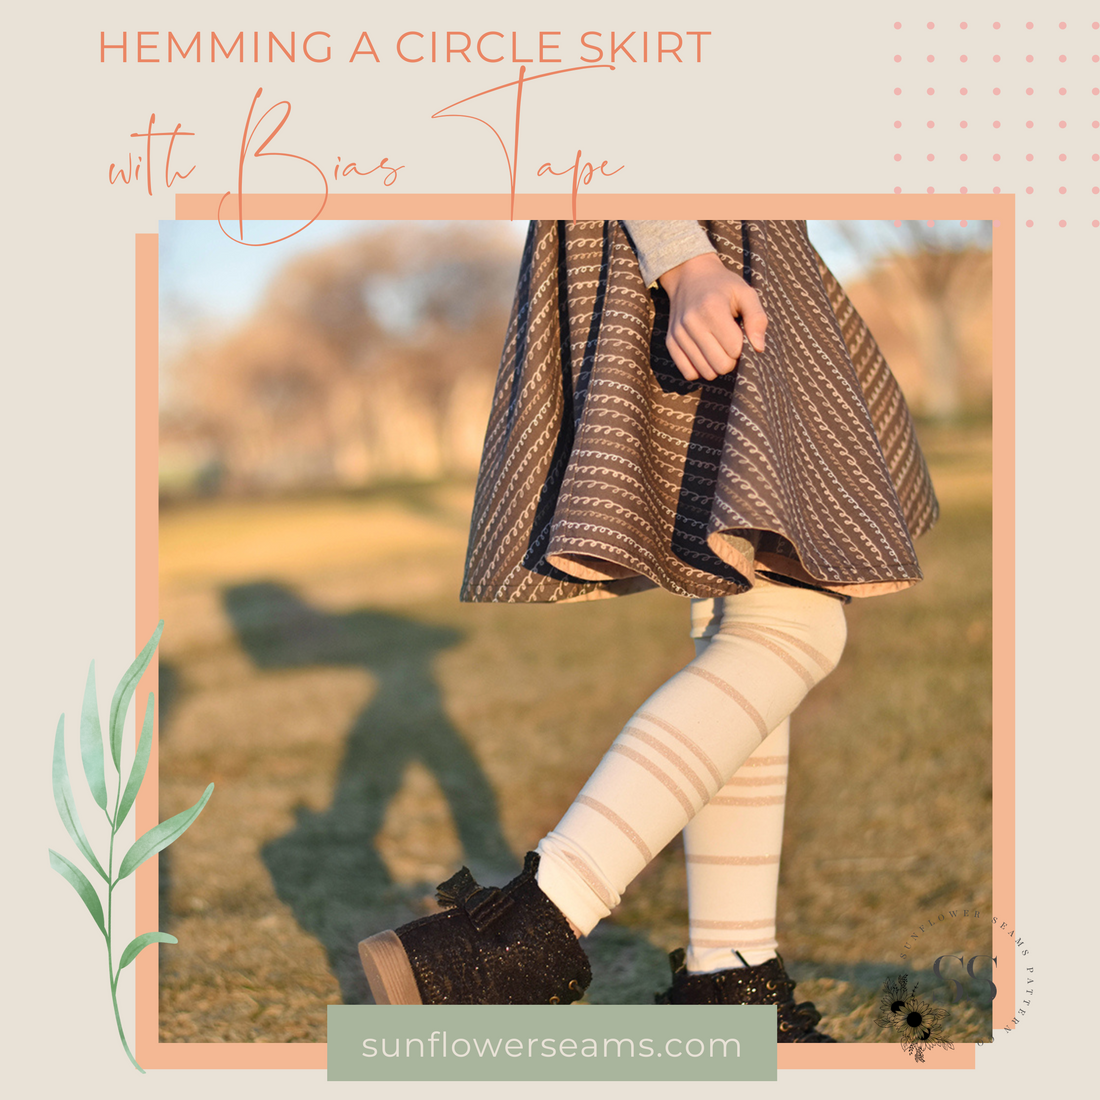 Hemming a Circle Skirt with Bias Tape {A Tutorial}